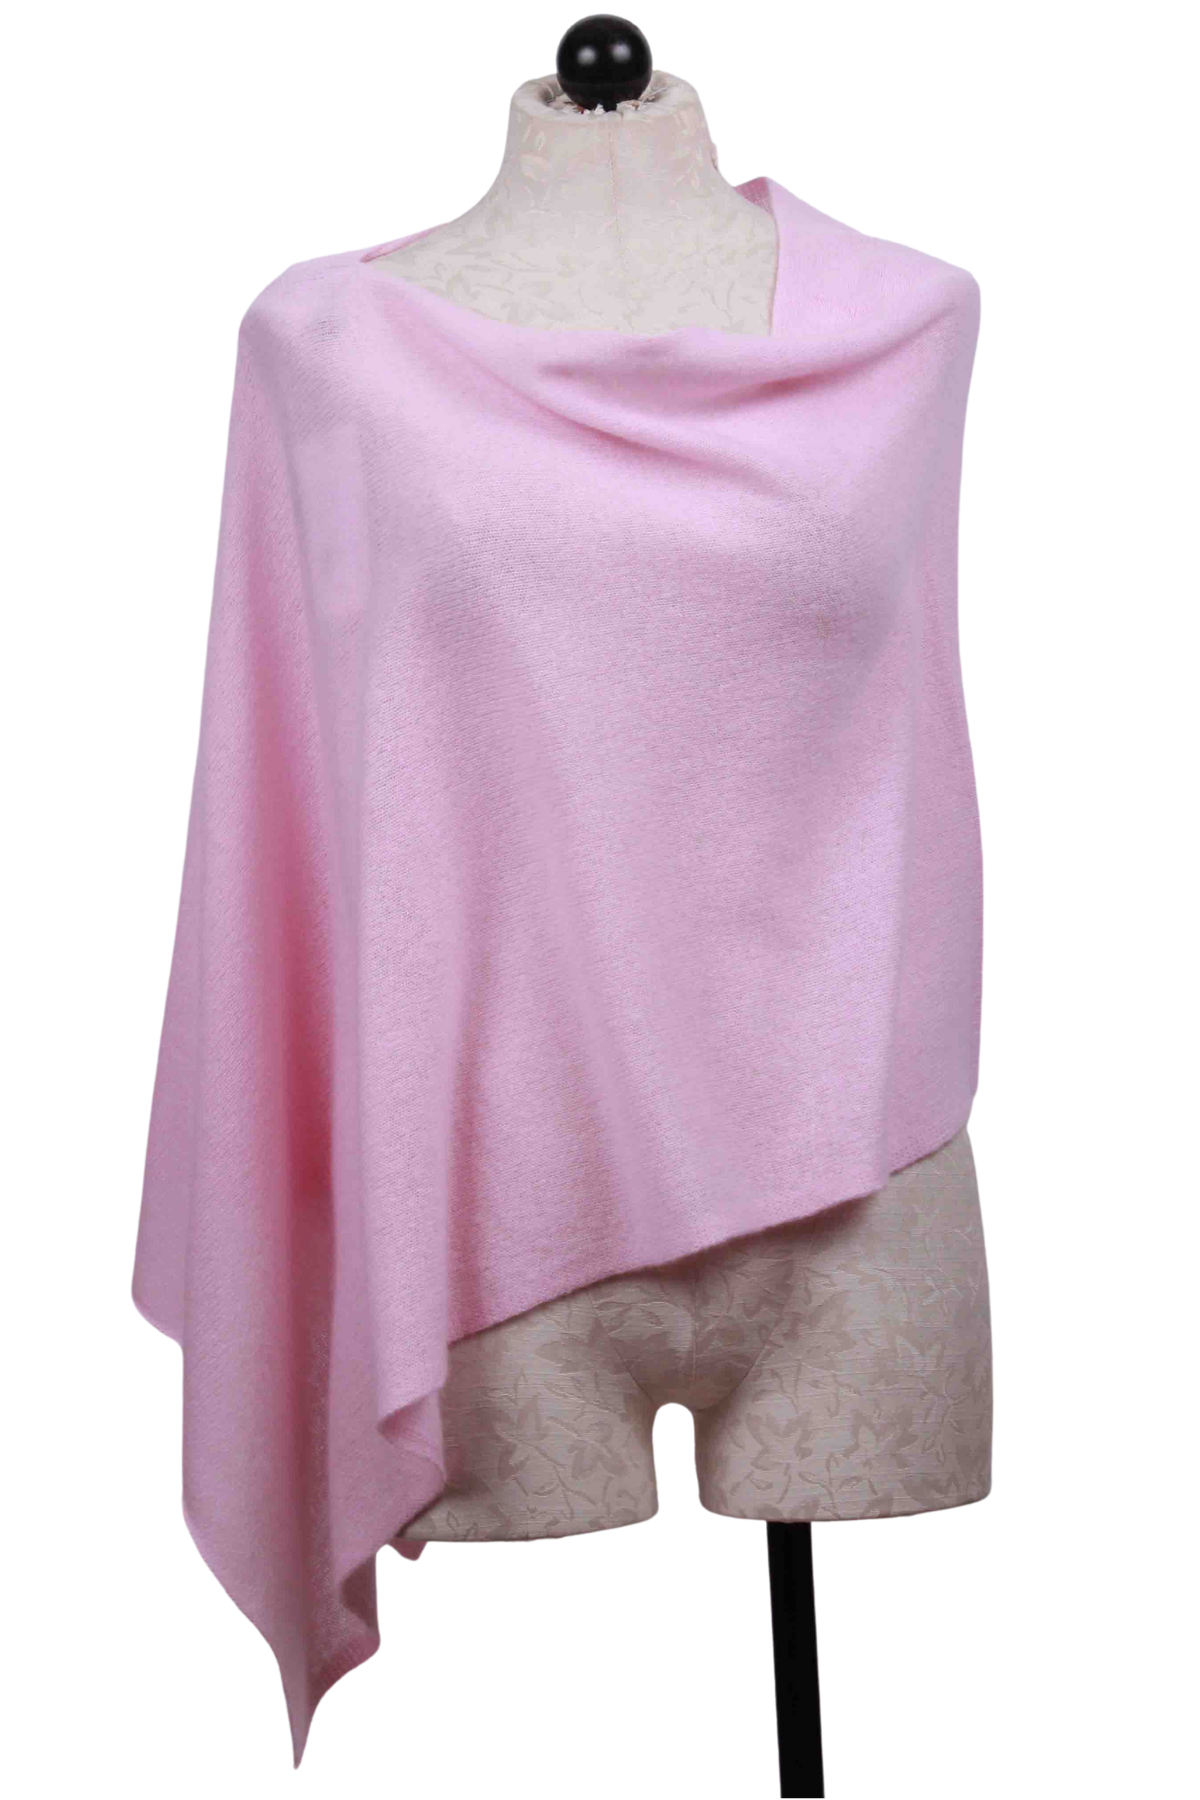 Beach Pink Draped Cashmere Dress Topper by Alashan Cashmere